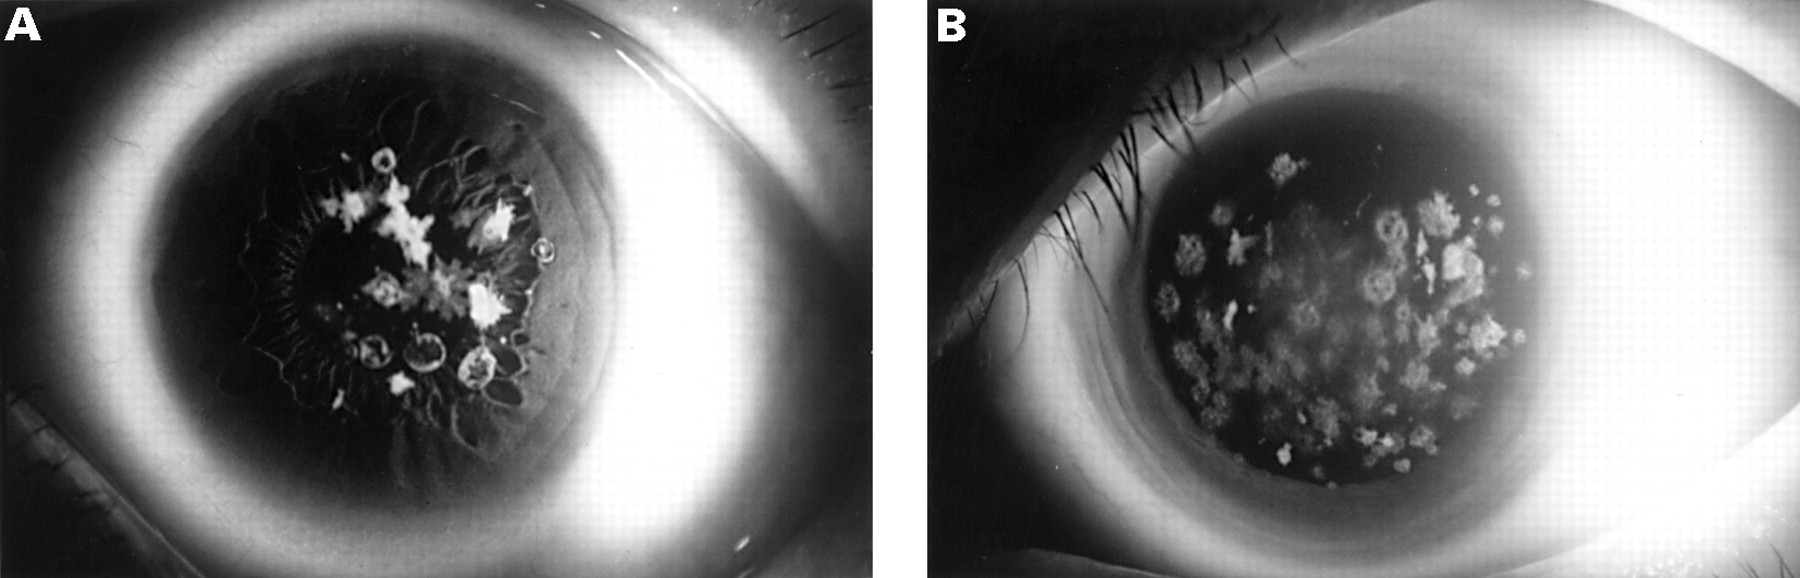 Corneal guttata associated with the corneal dystrophy